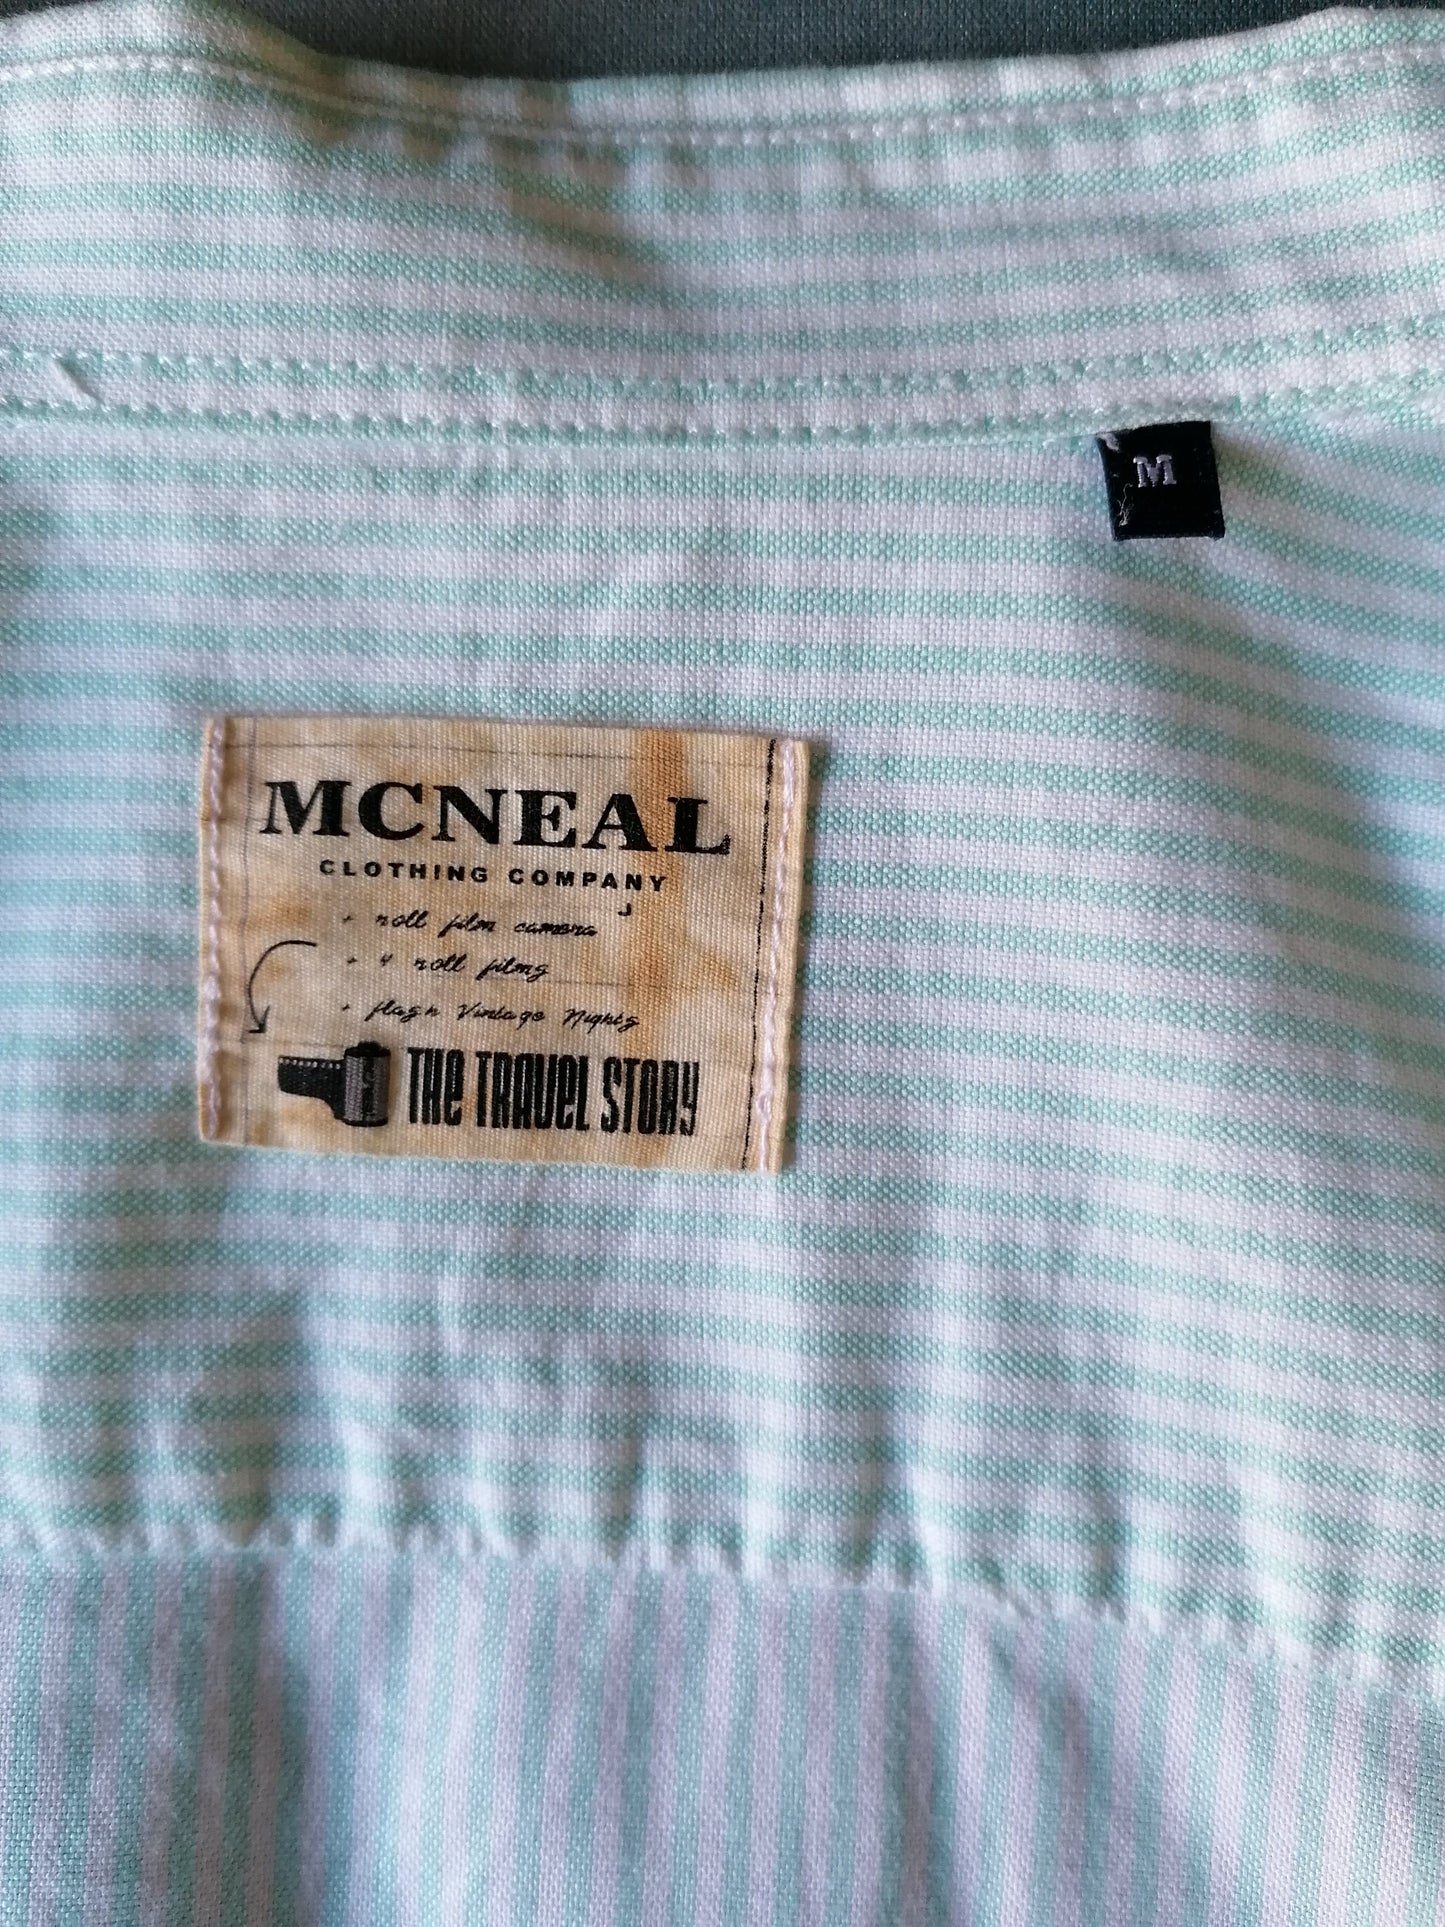 Chemise McNeal. Vert blanc rayé. Taille M.